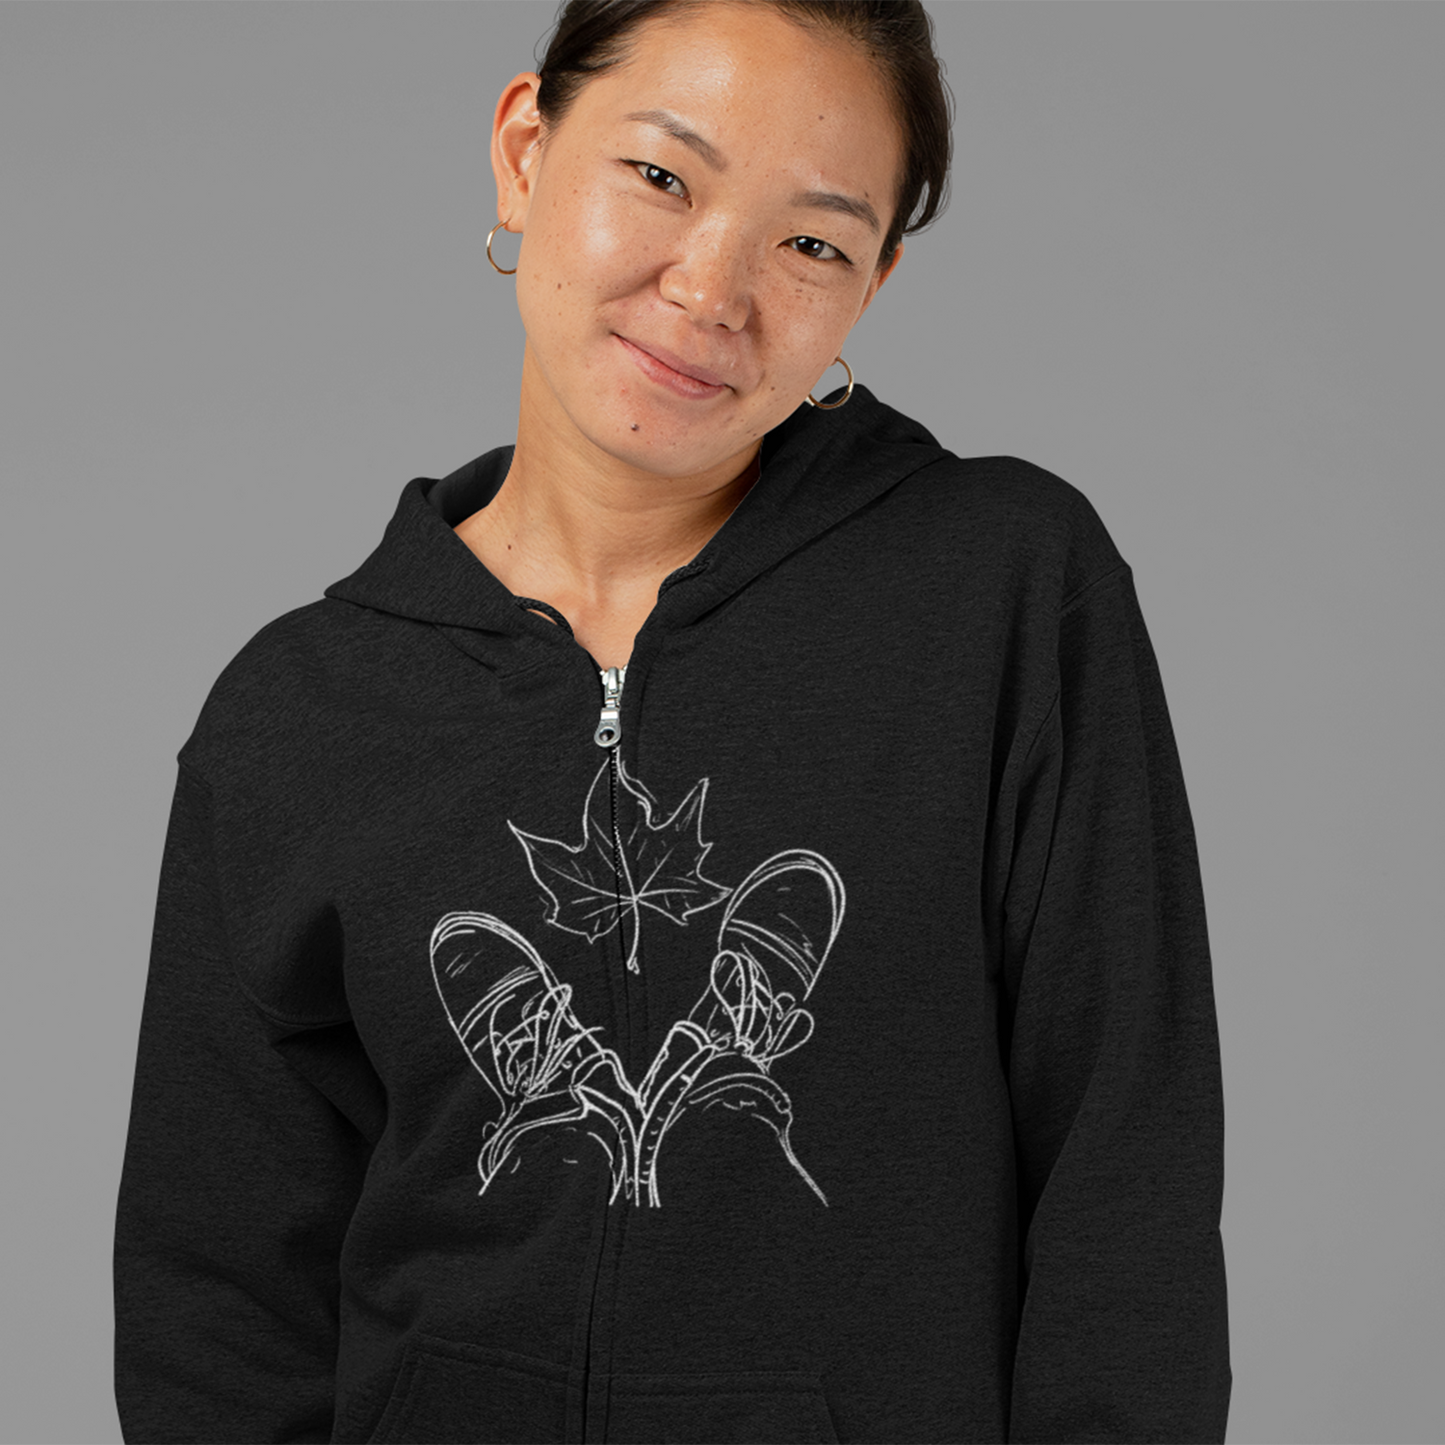 Fall Leaf and Boots Sketch - Adult Unisex Zip Up Hoodie